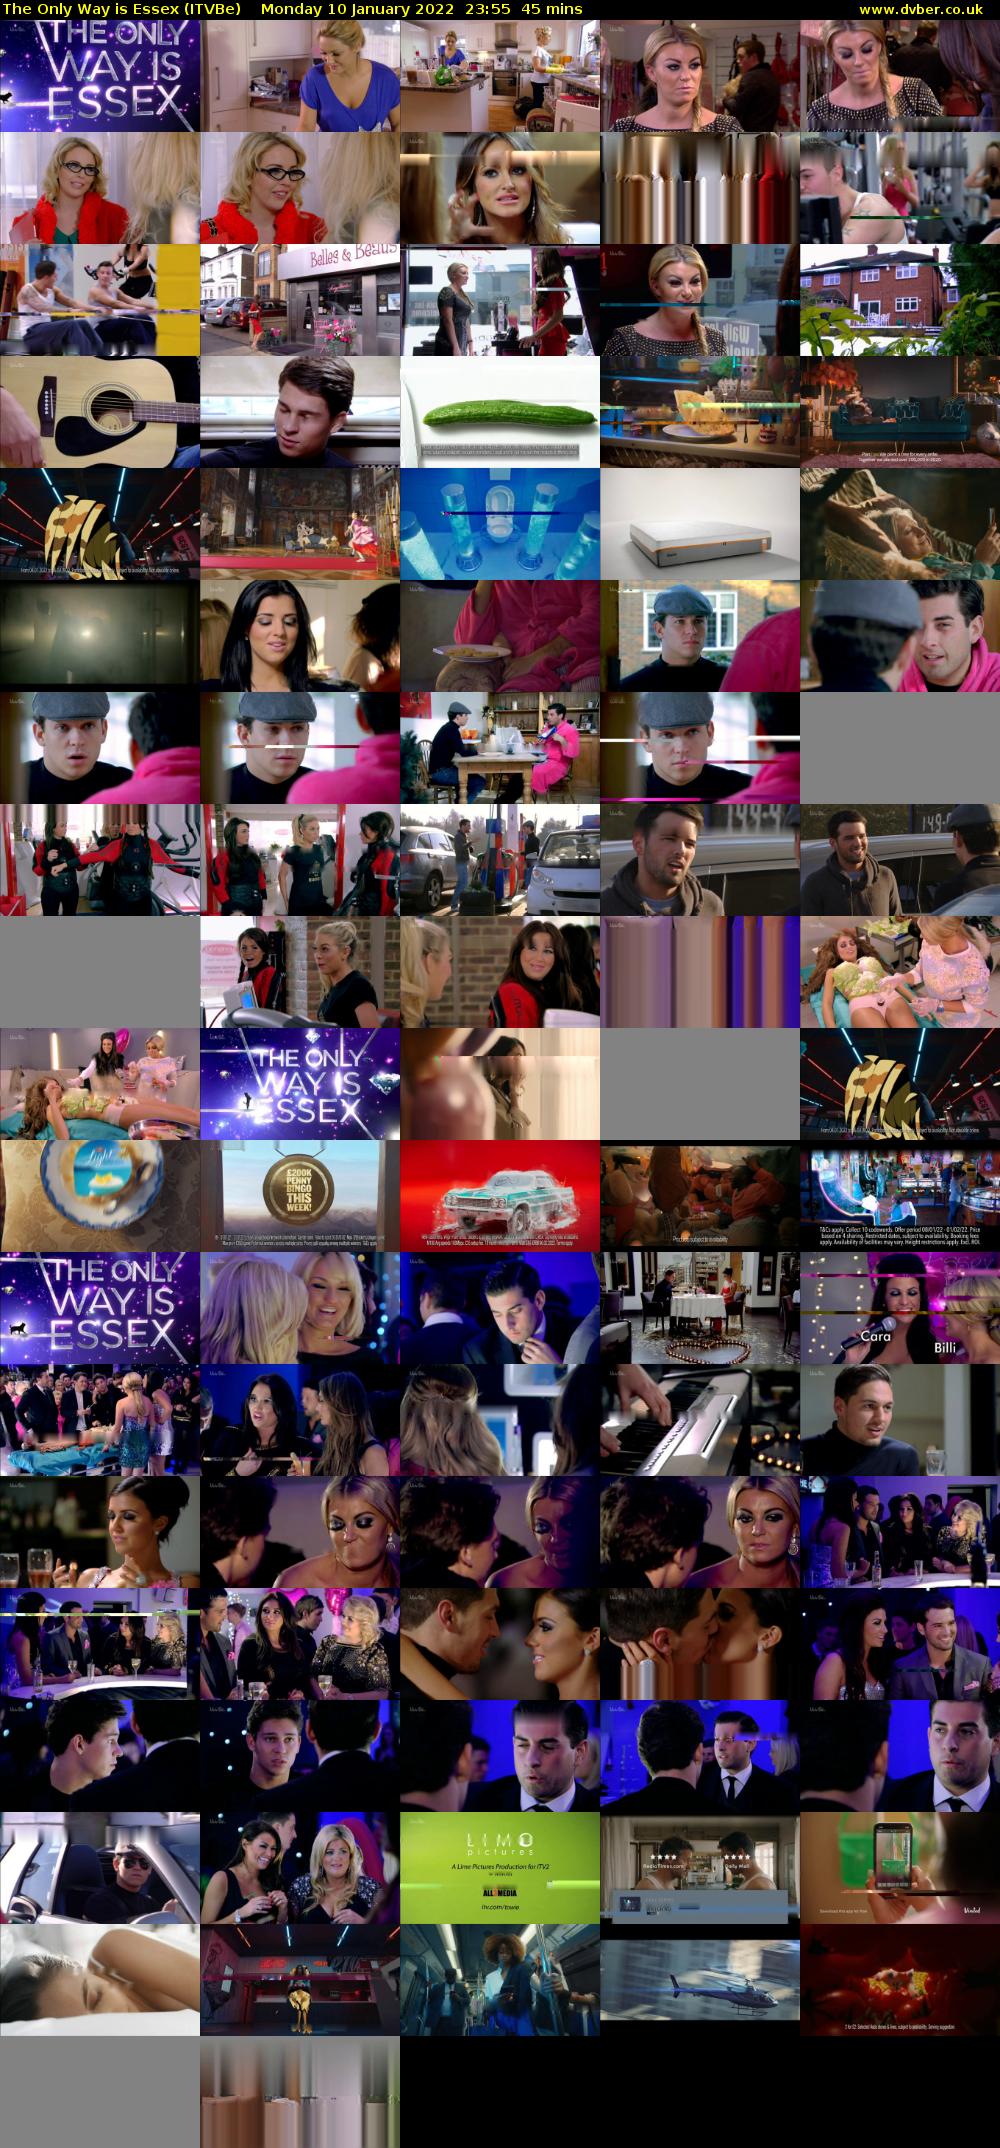 The Only Way is Essex (ITVBe) Monday 10 January 2022 23:55 - 00:40